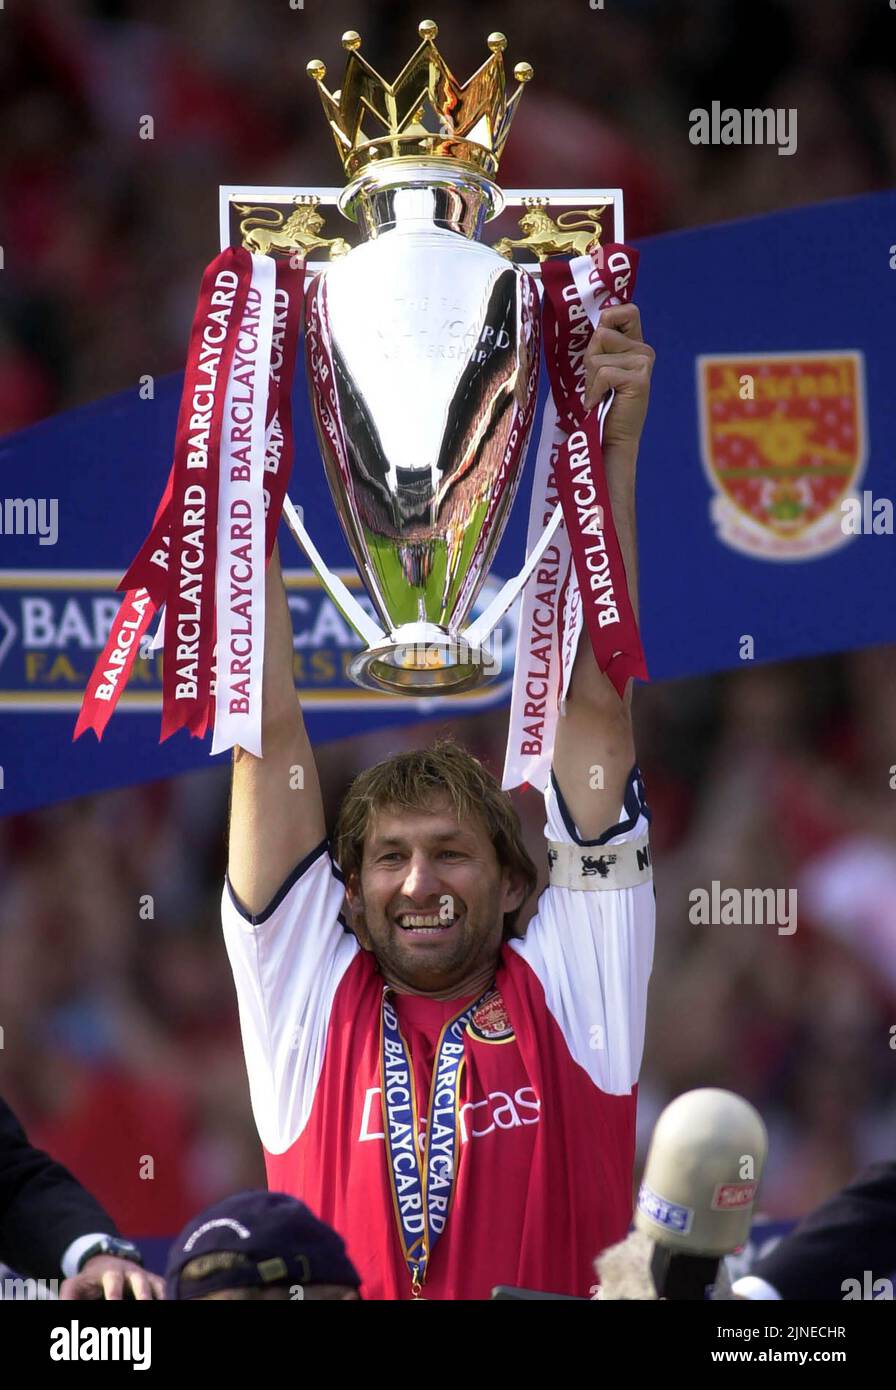 Arsenal V Everton 11/5/02 at Highbury after winning the league pic shows: Tony Adams with trophy Stock Photo